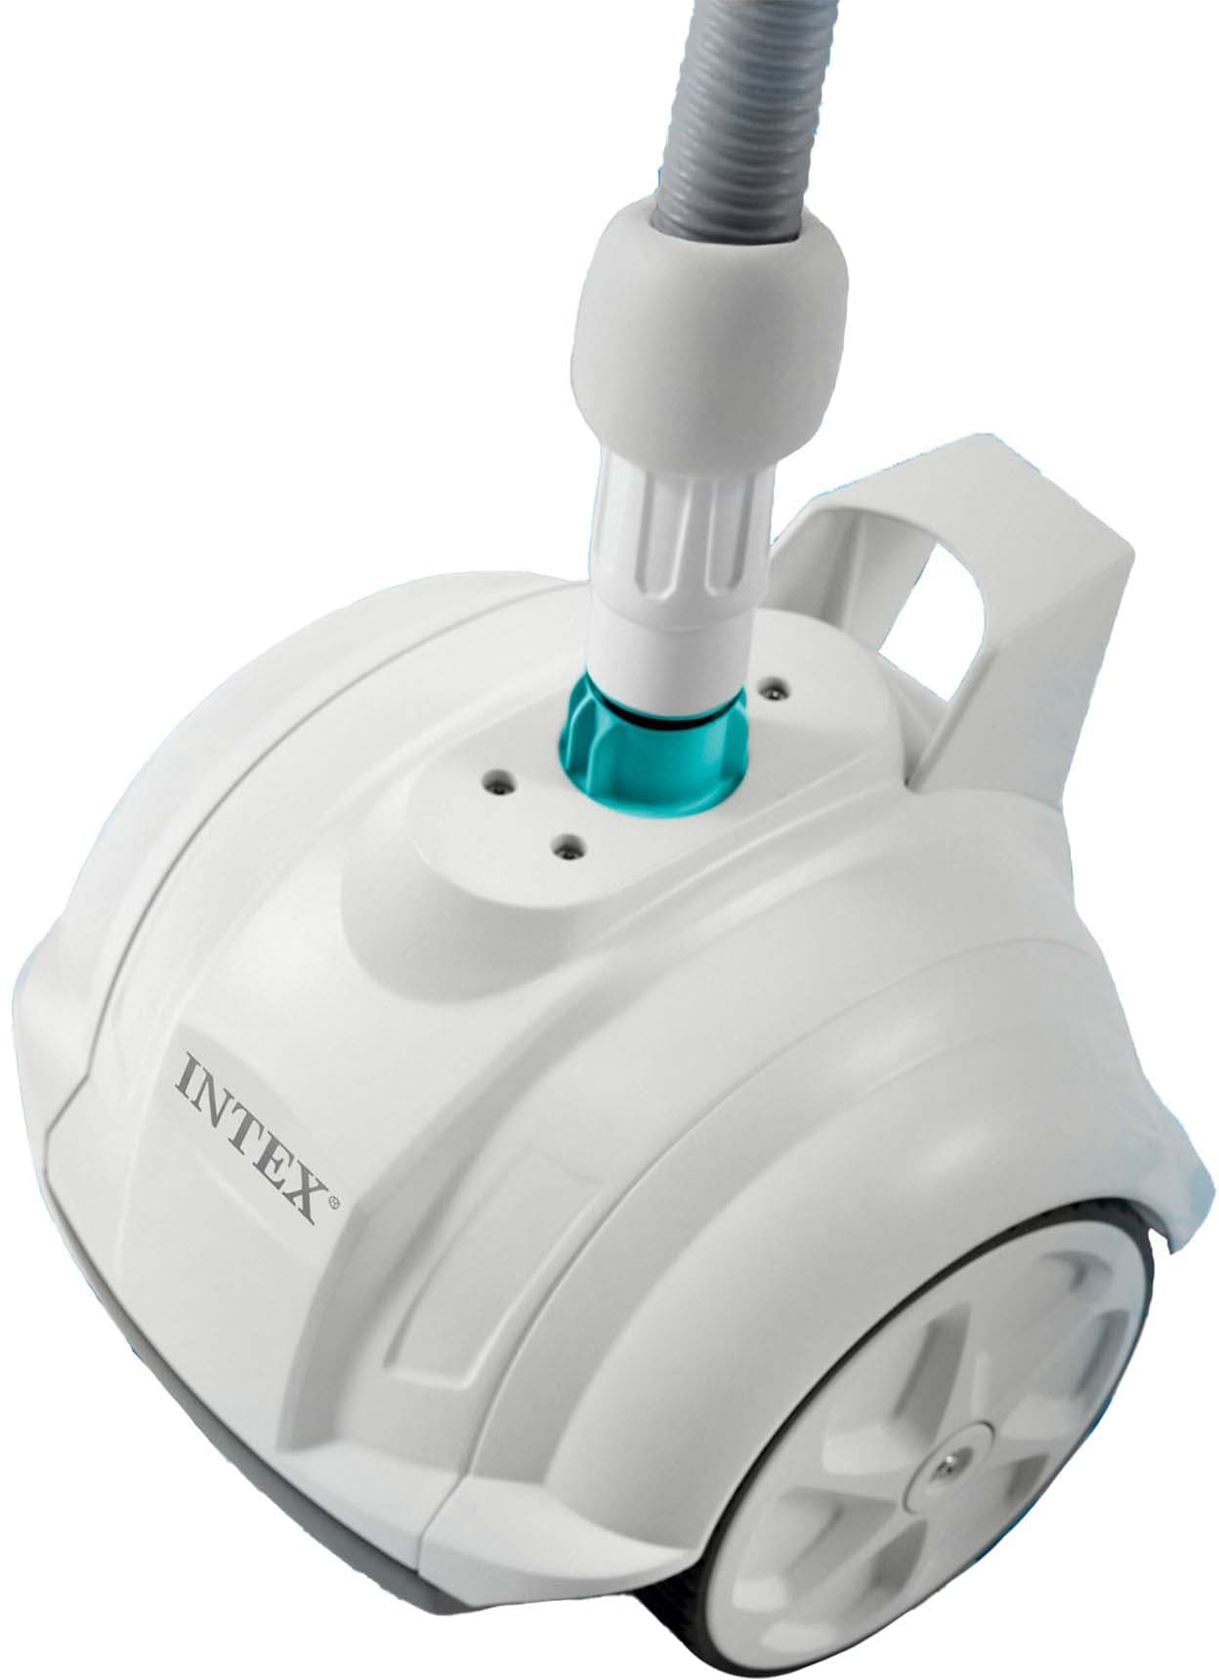 Intex automatic pool robot 'ZX50' - for small pools